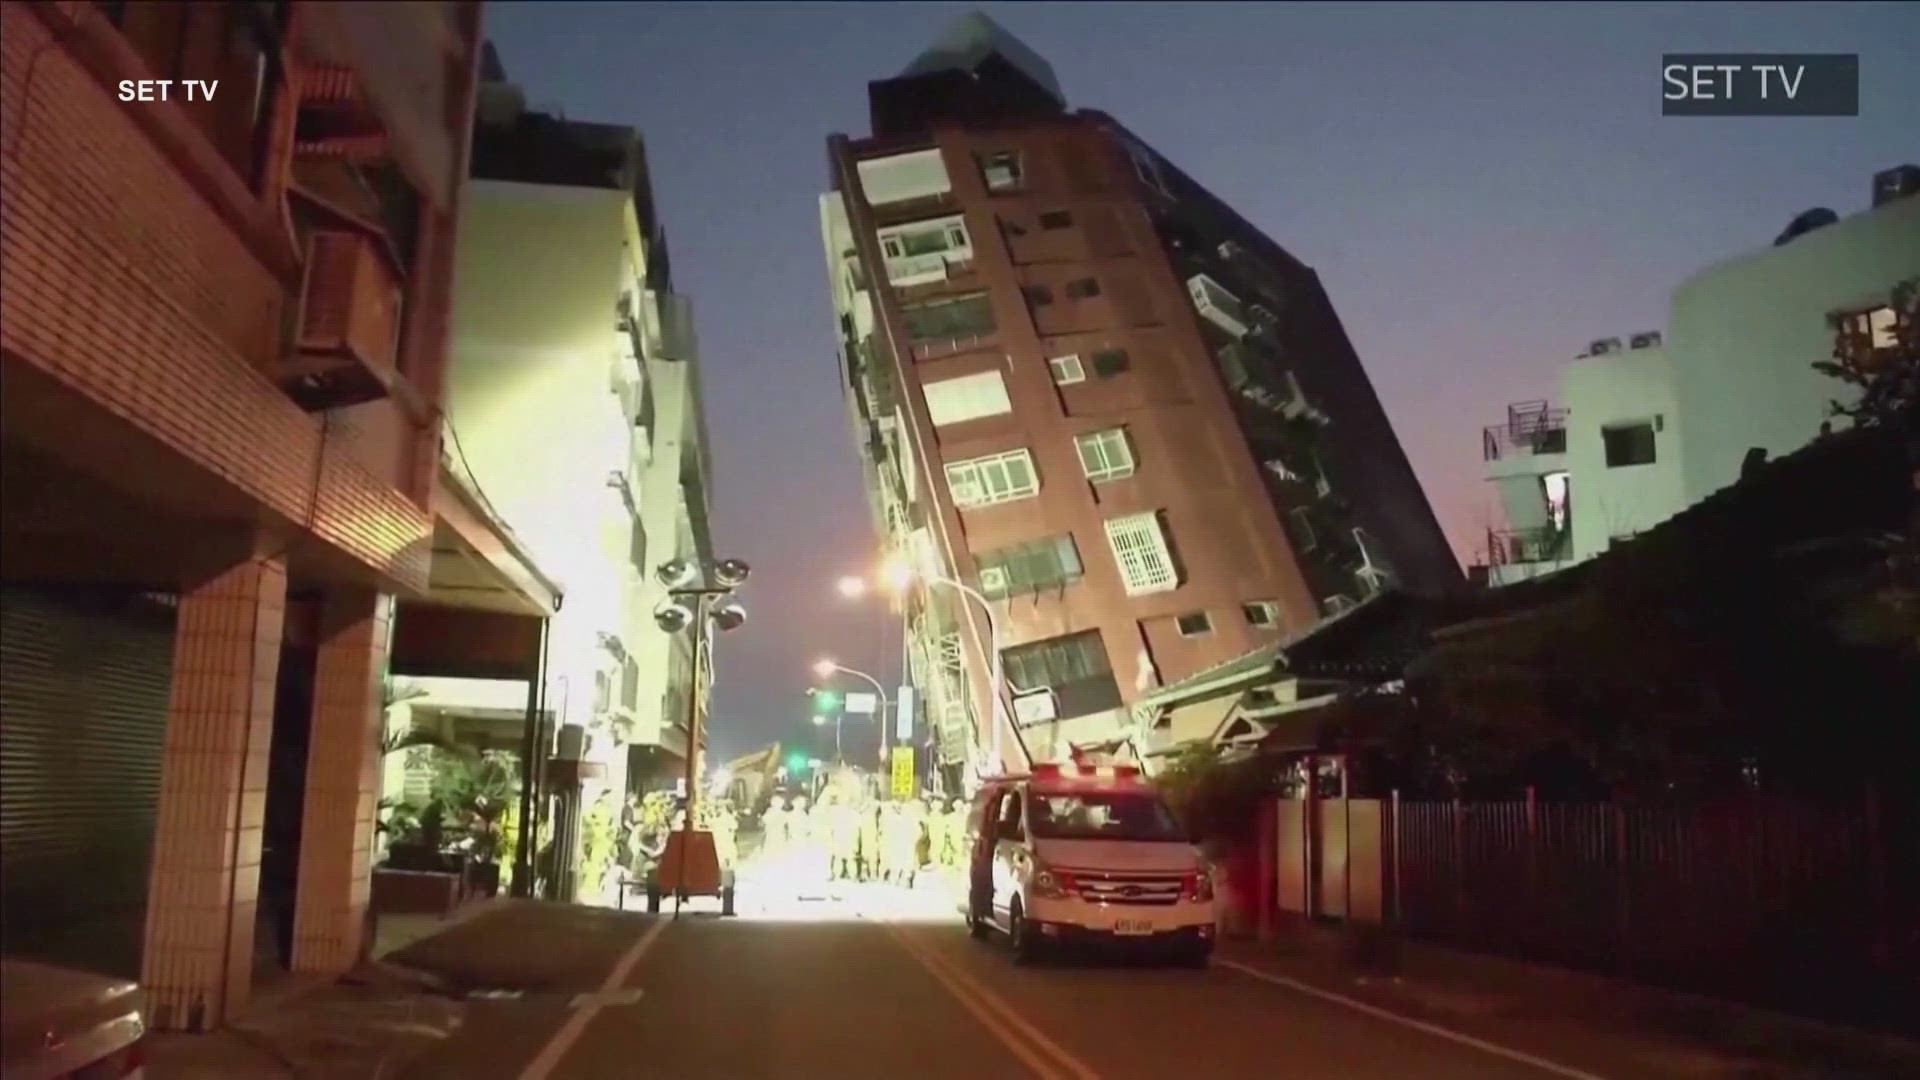 Taiwan’s earthquake monitoring agency gave the magnitude as 7.2 while the U.S. put it at 7.4.